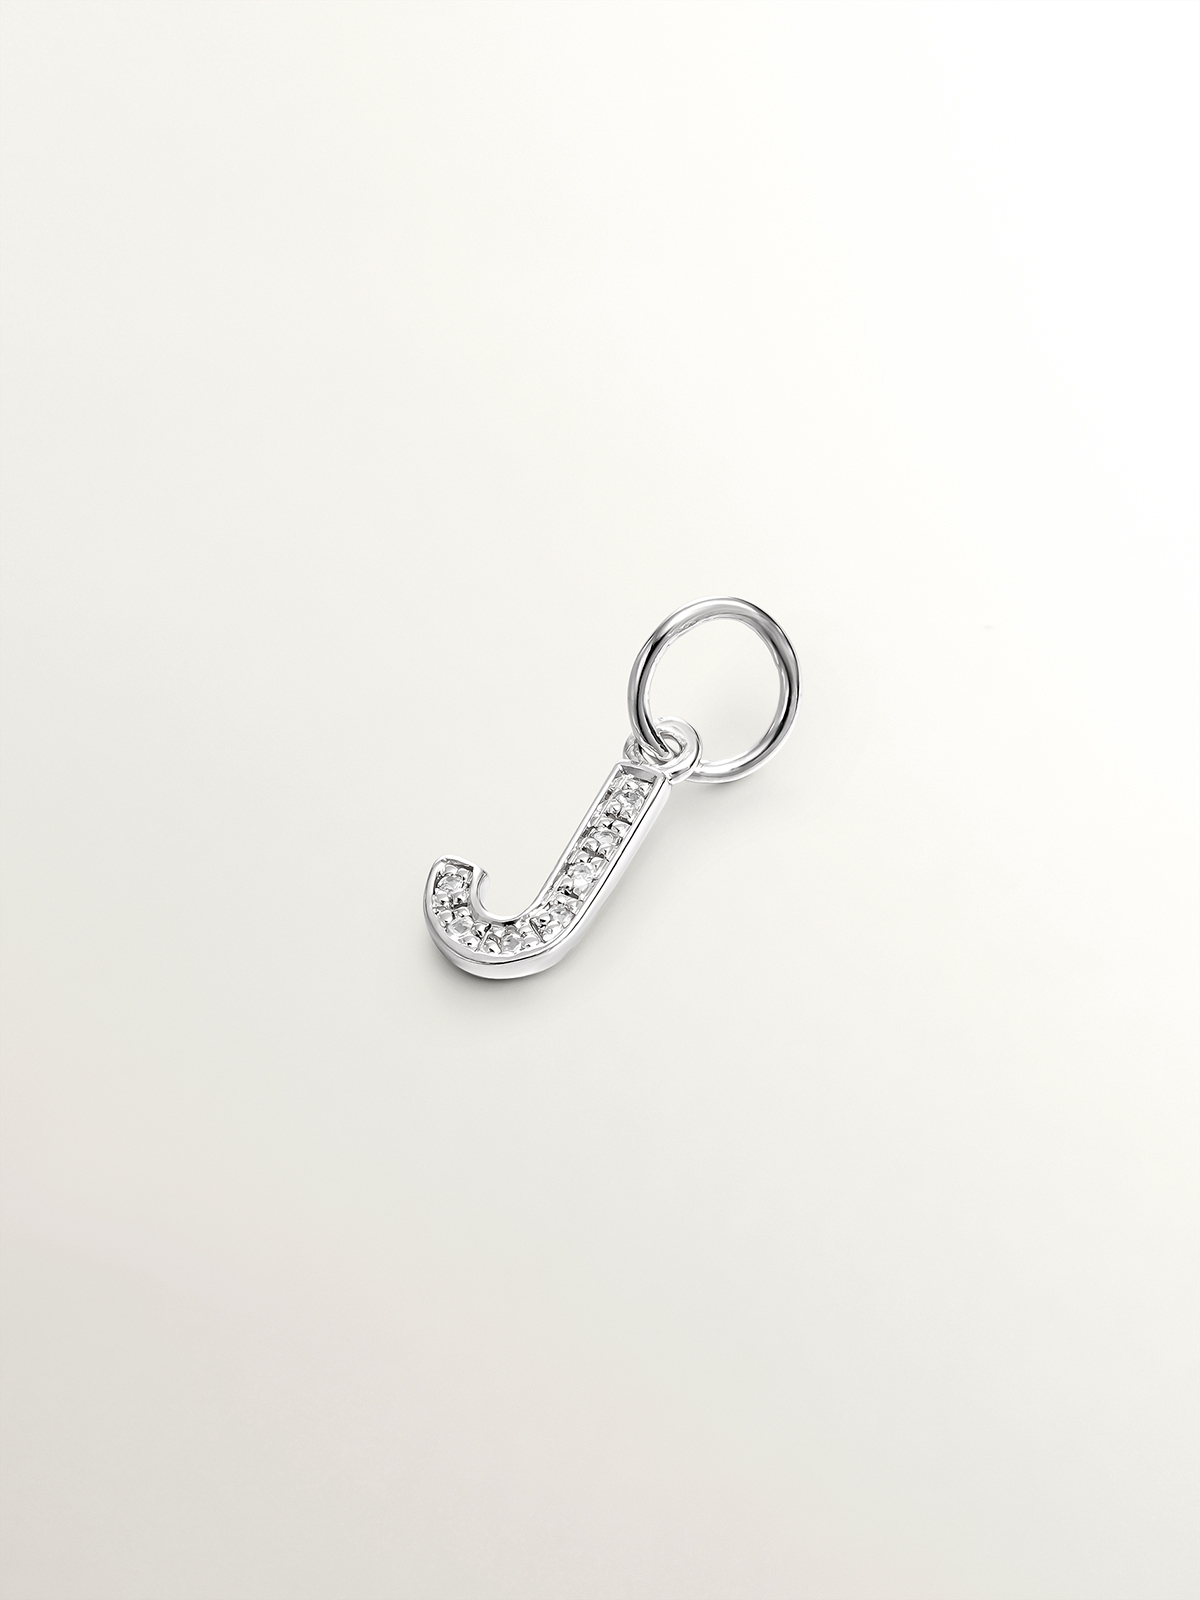 925 Silver Charm with White Topaz Initial J